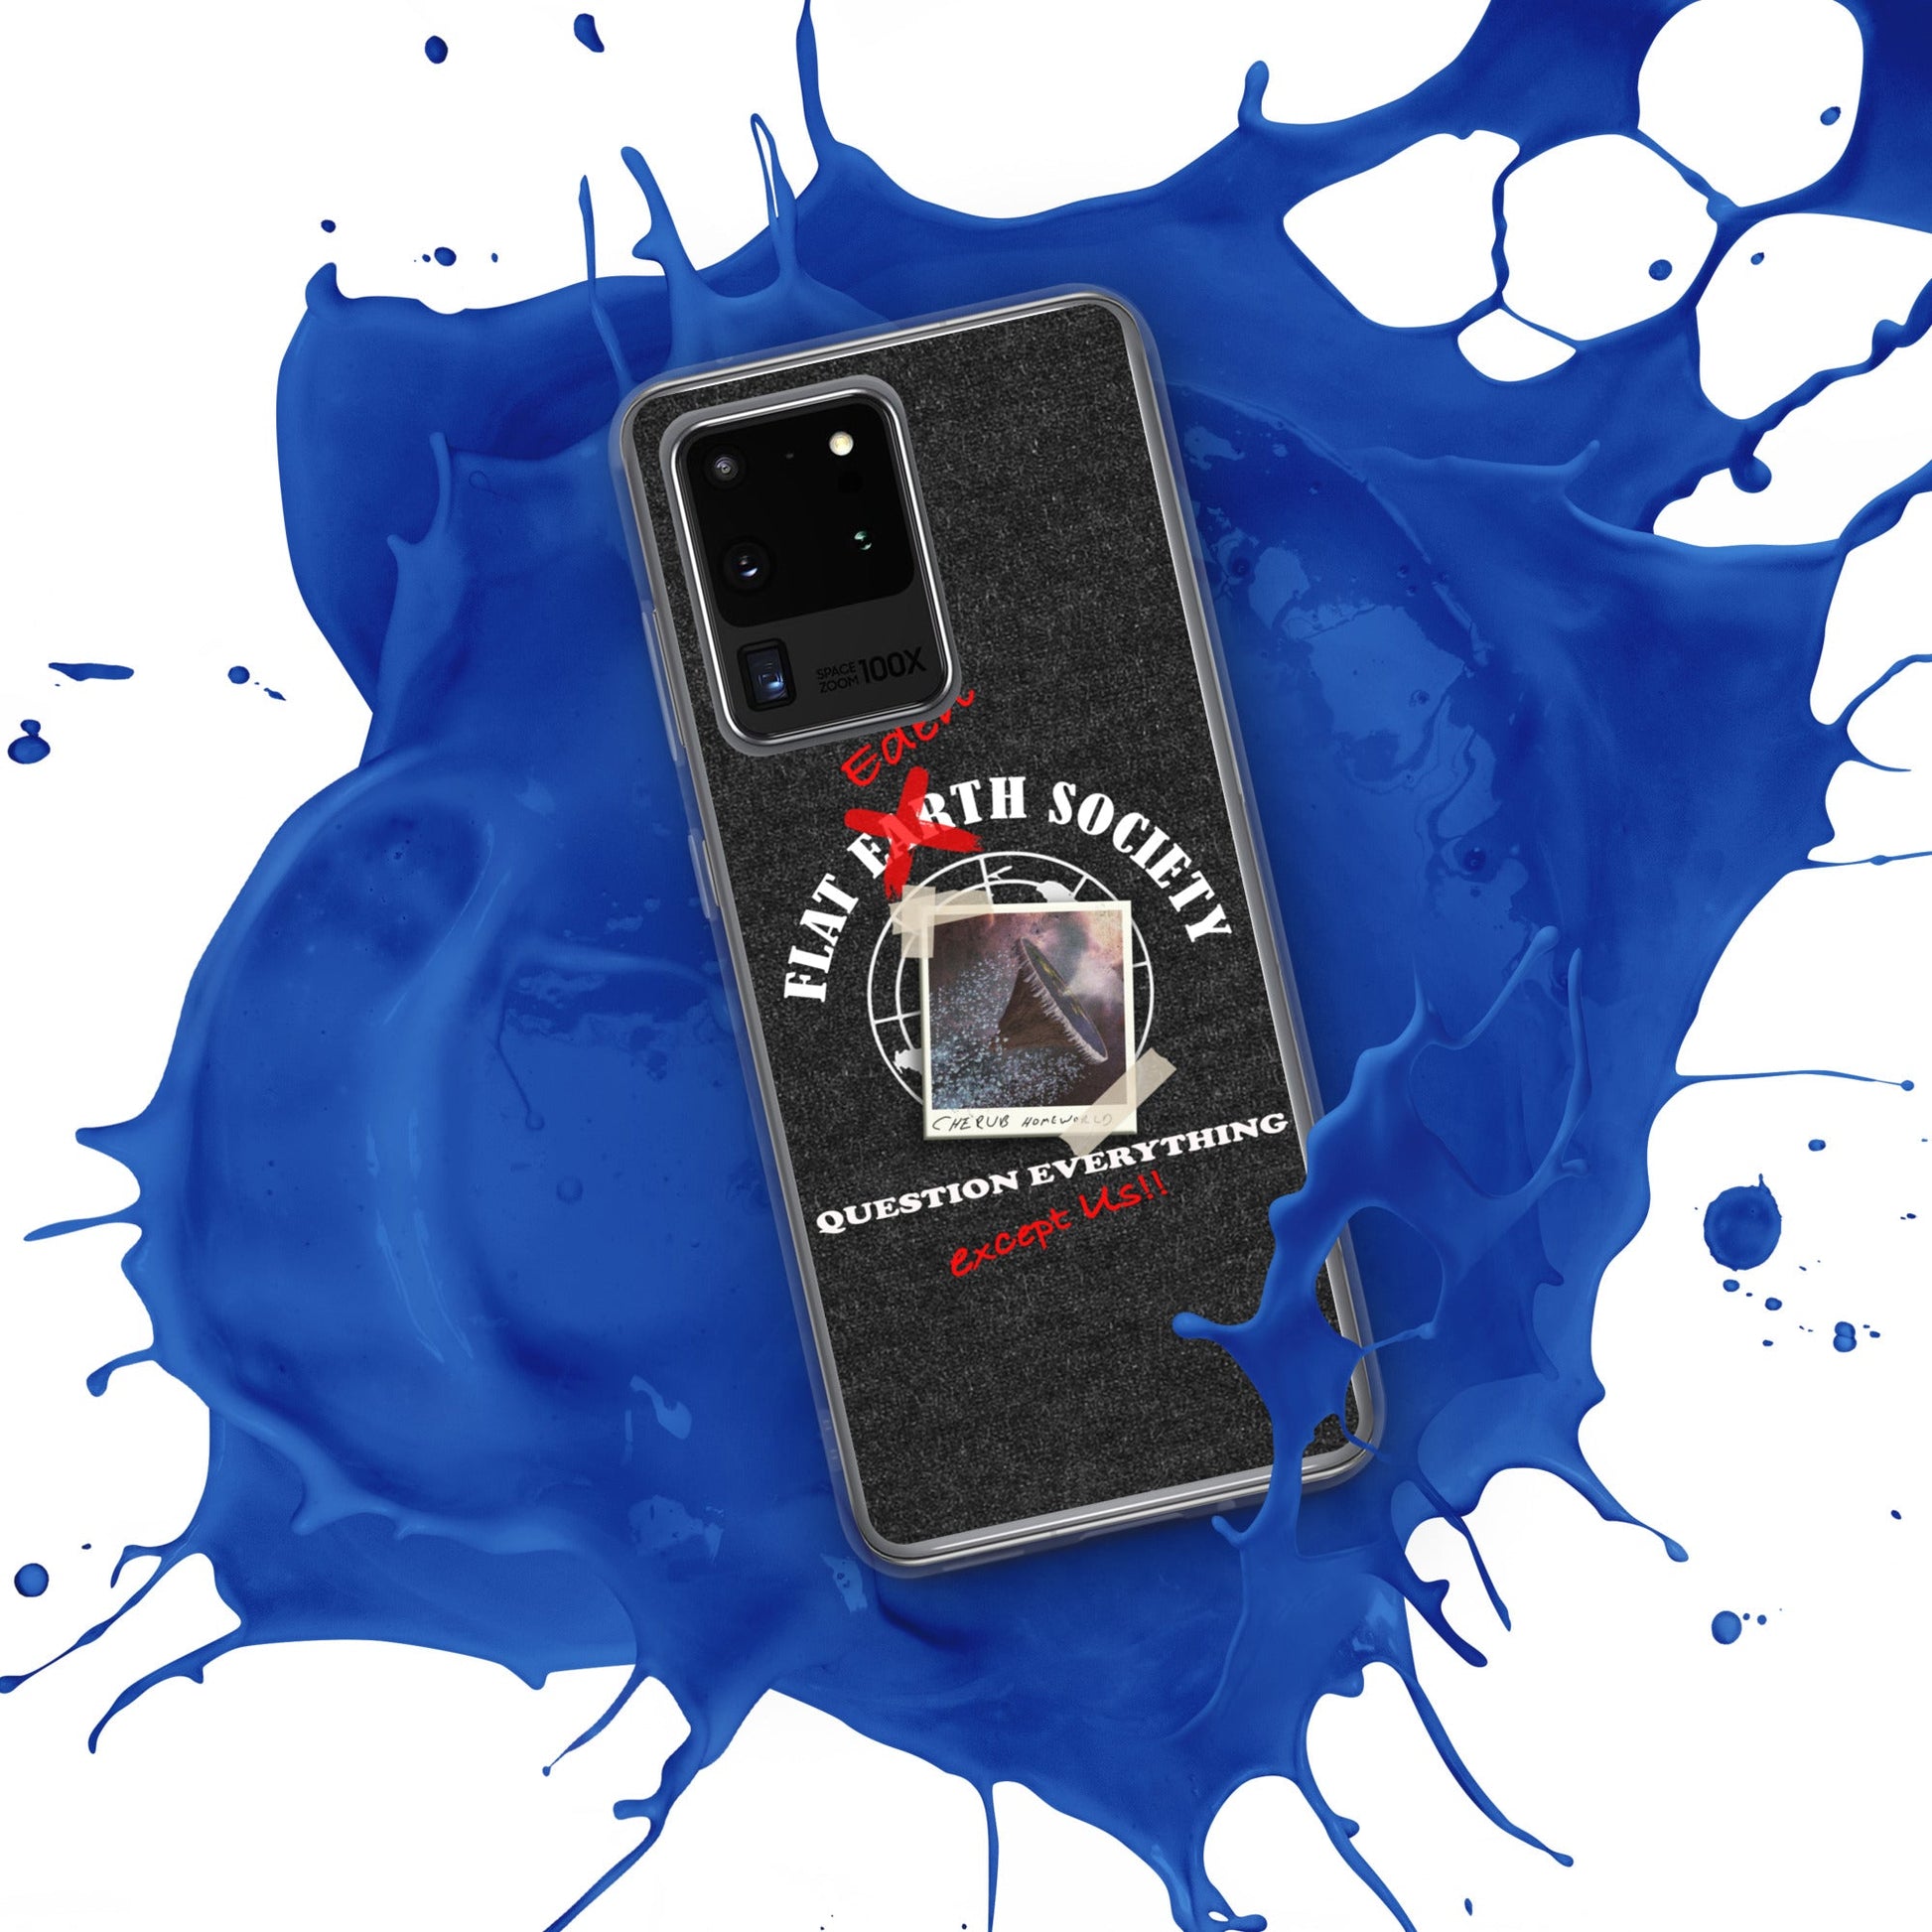 Samsung | Intergalactic Space Force 2 | Flat Eden Society - Spectral Ink Shop - Mobile Phone Cases -7213222_11349